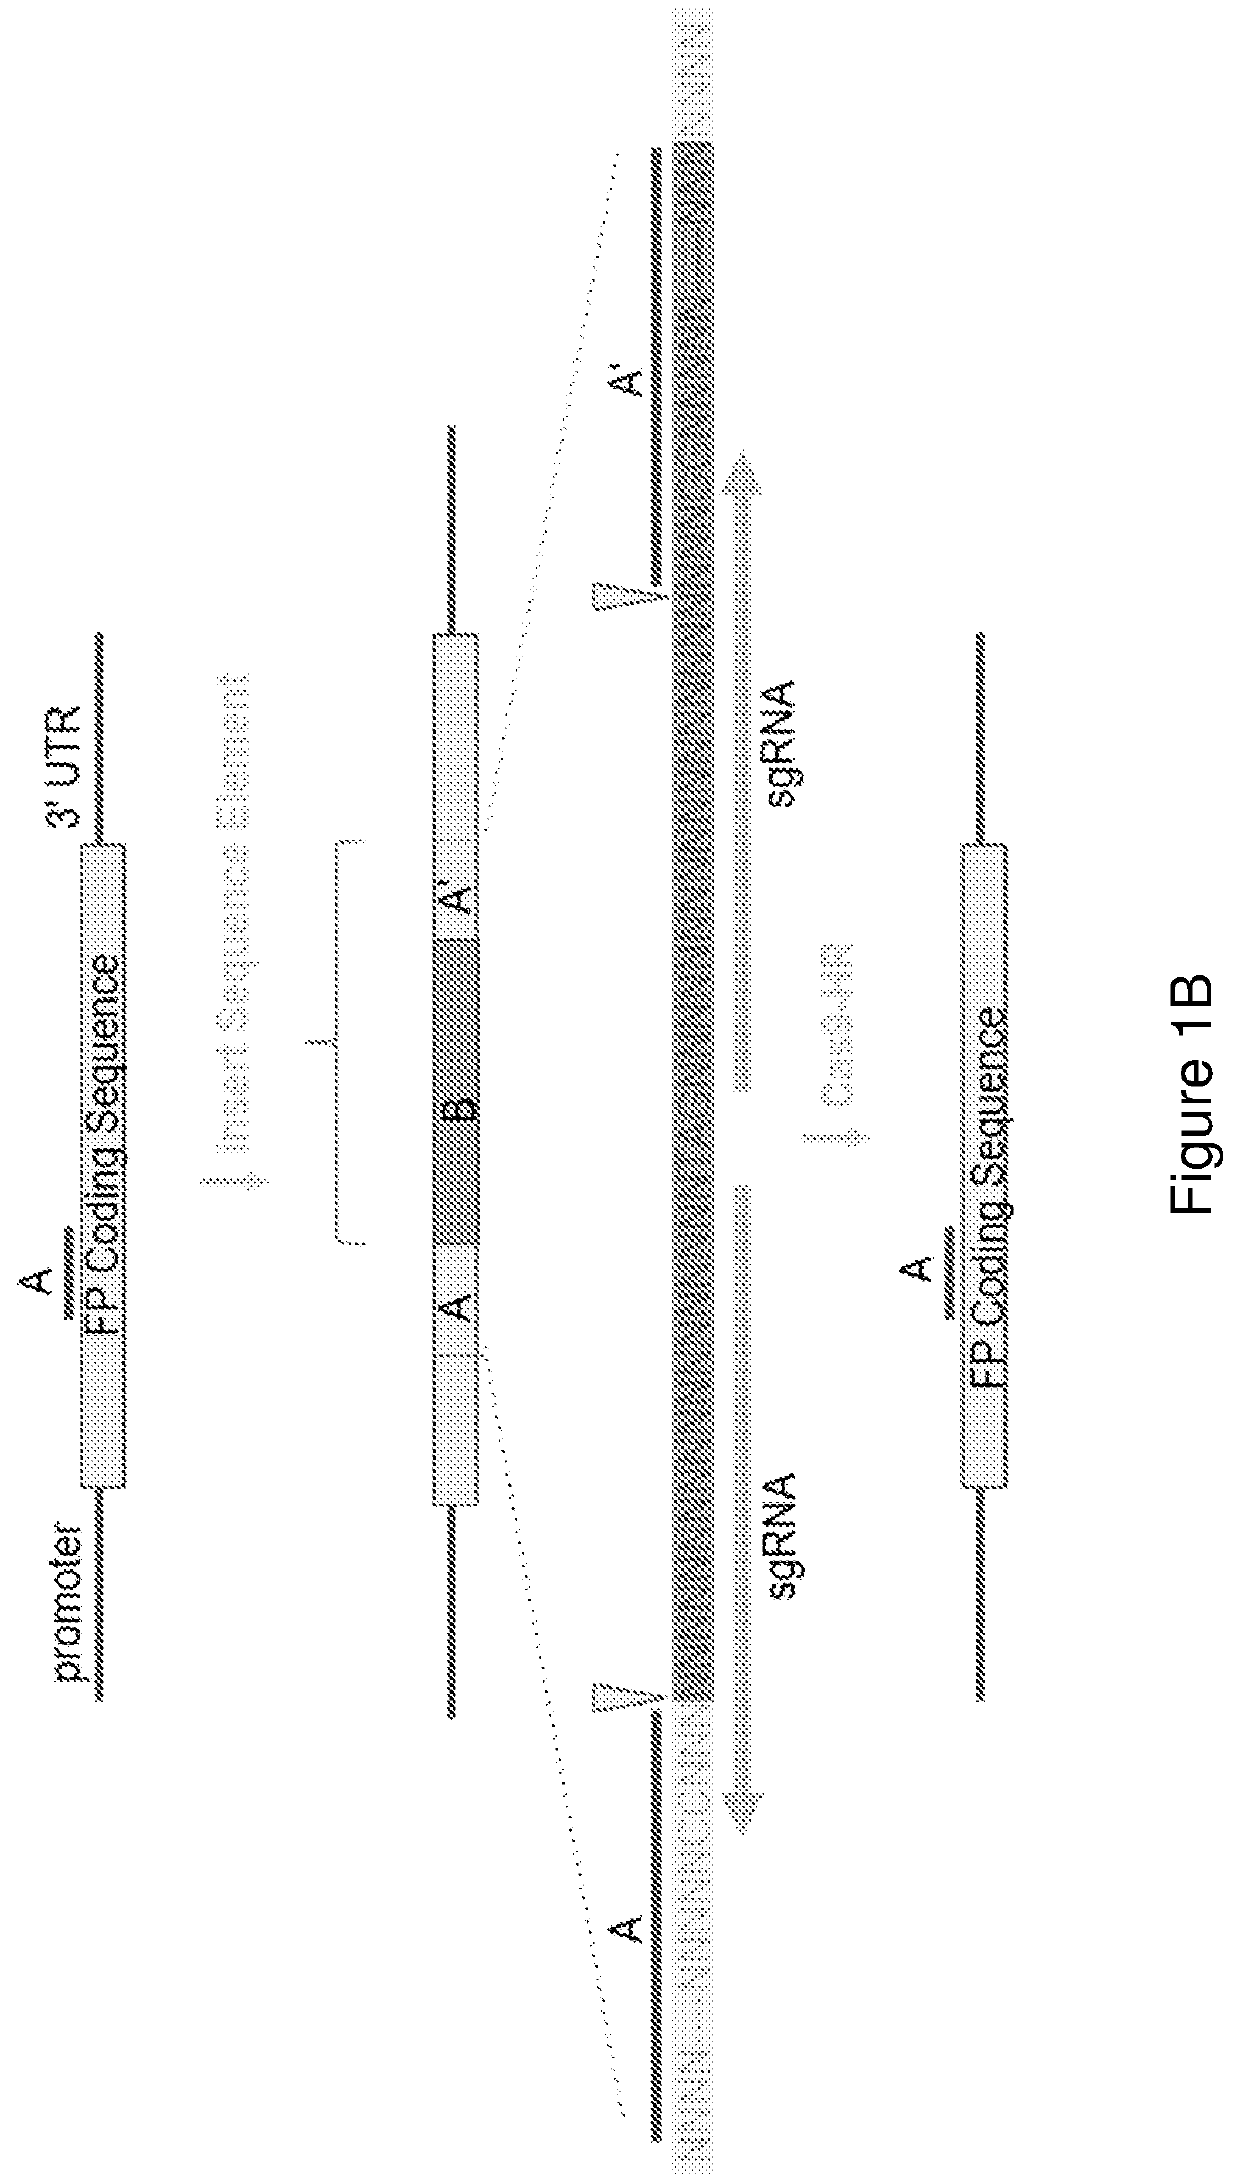 Homologous Recombination Reporter Construct and Uses Thereof